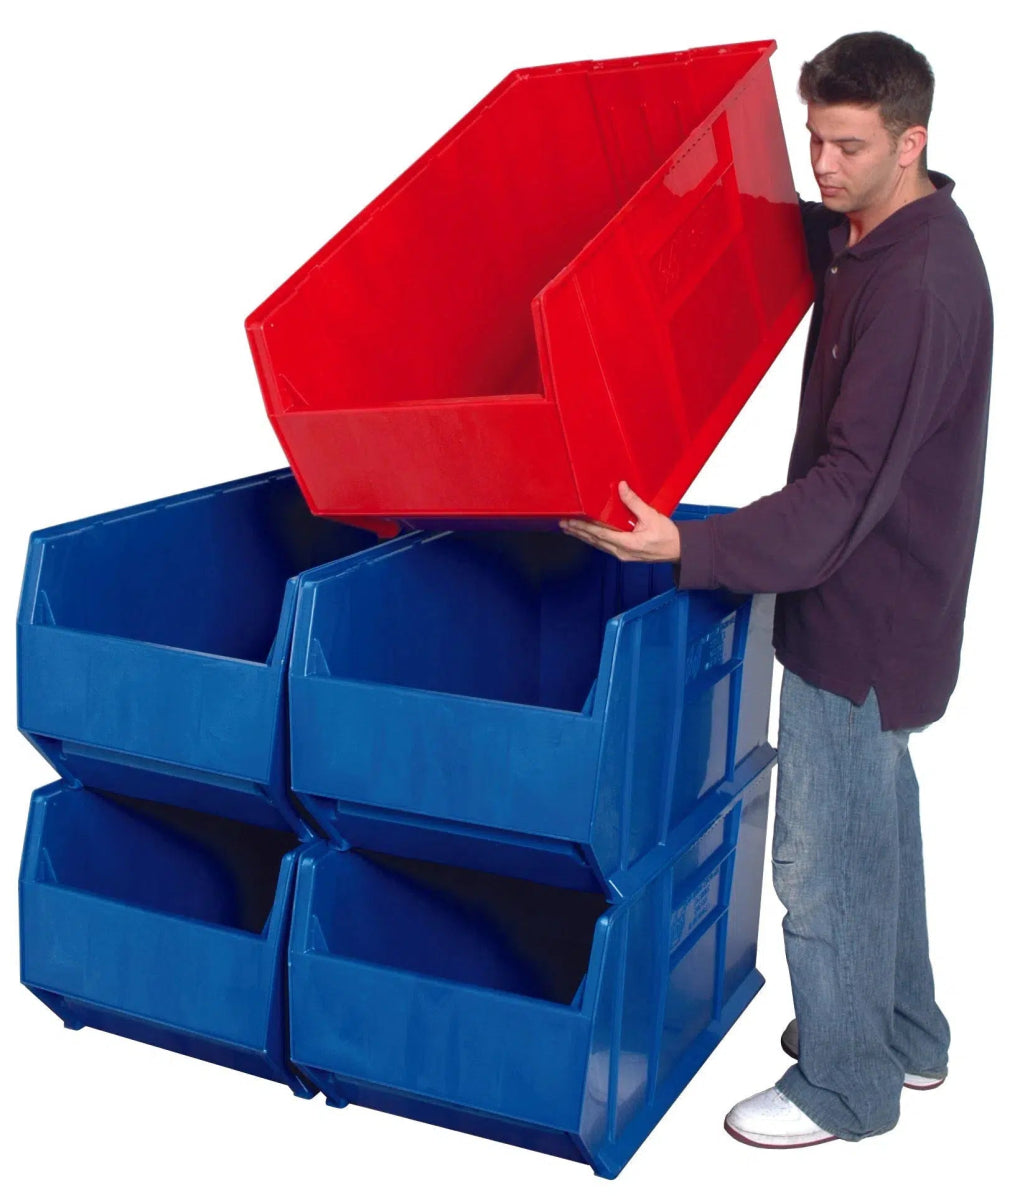 Extra Large Stacking Bins - Industrial 4 Less